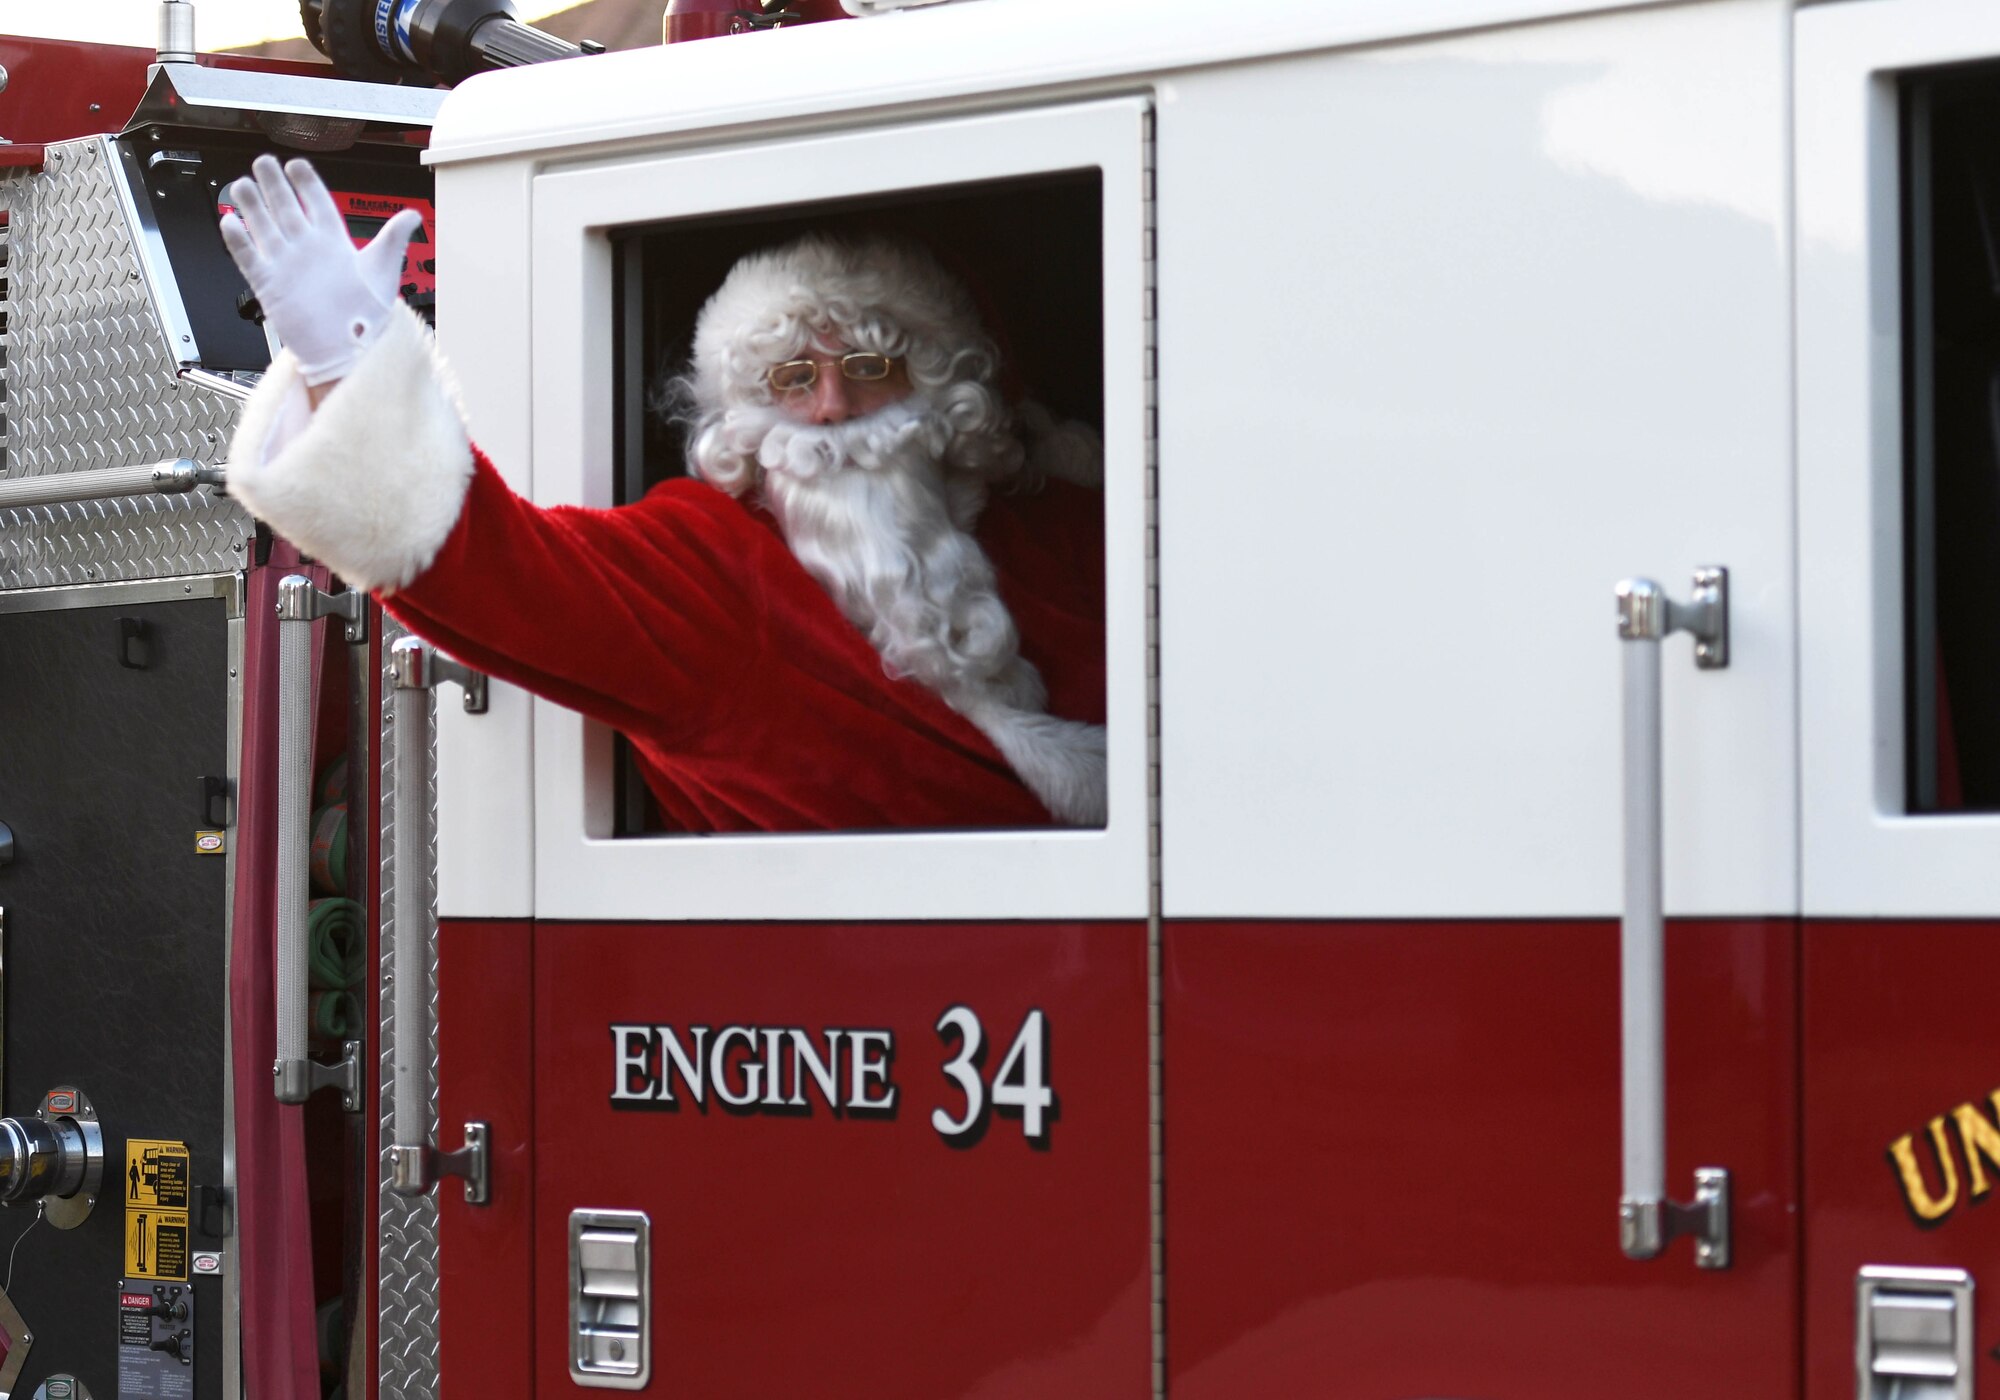 Santa waves to children from a fire truck in Bay Ridge housing Dec. 21, 2017, on Keesler Air Force Base, Mississippi. Santa and fire department members drove through each housing area to spread Christmas cheer to Airmen and their families. (U.S. Air Force photo by Kemberly Groue)